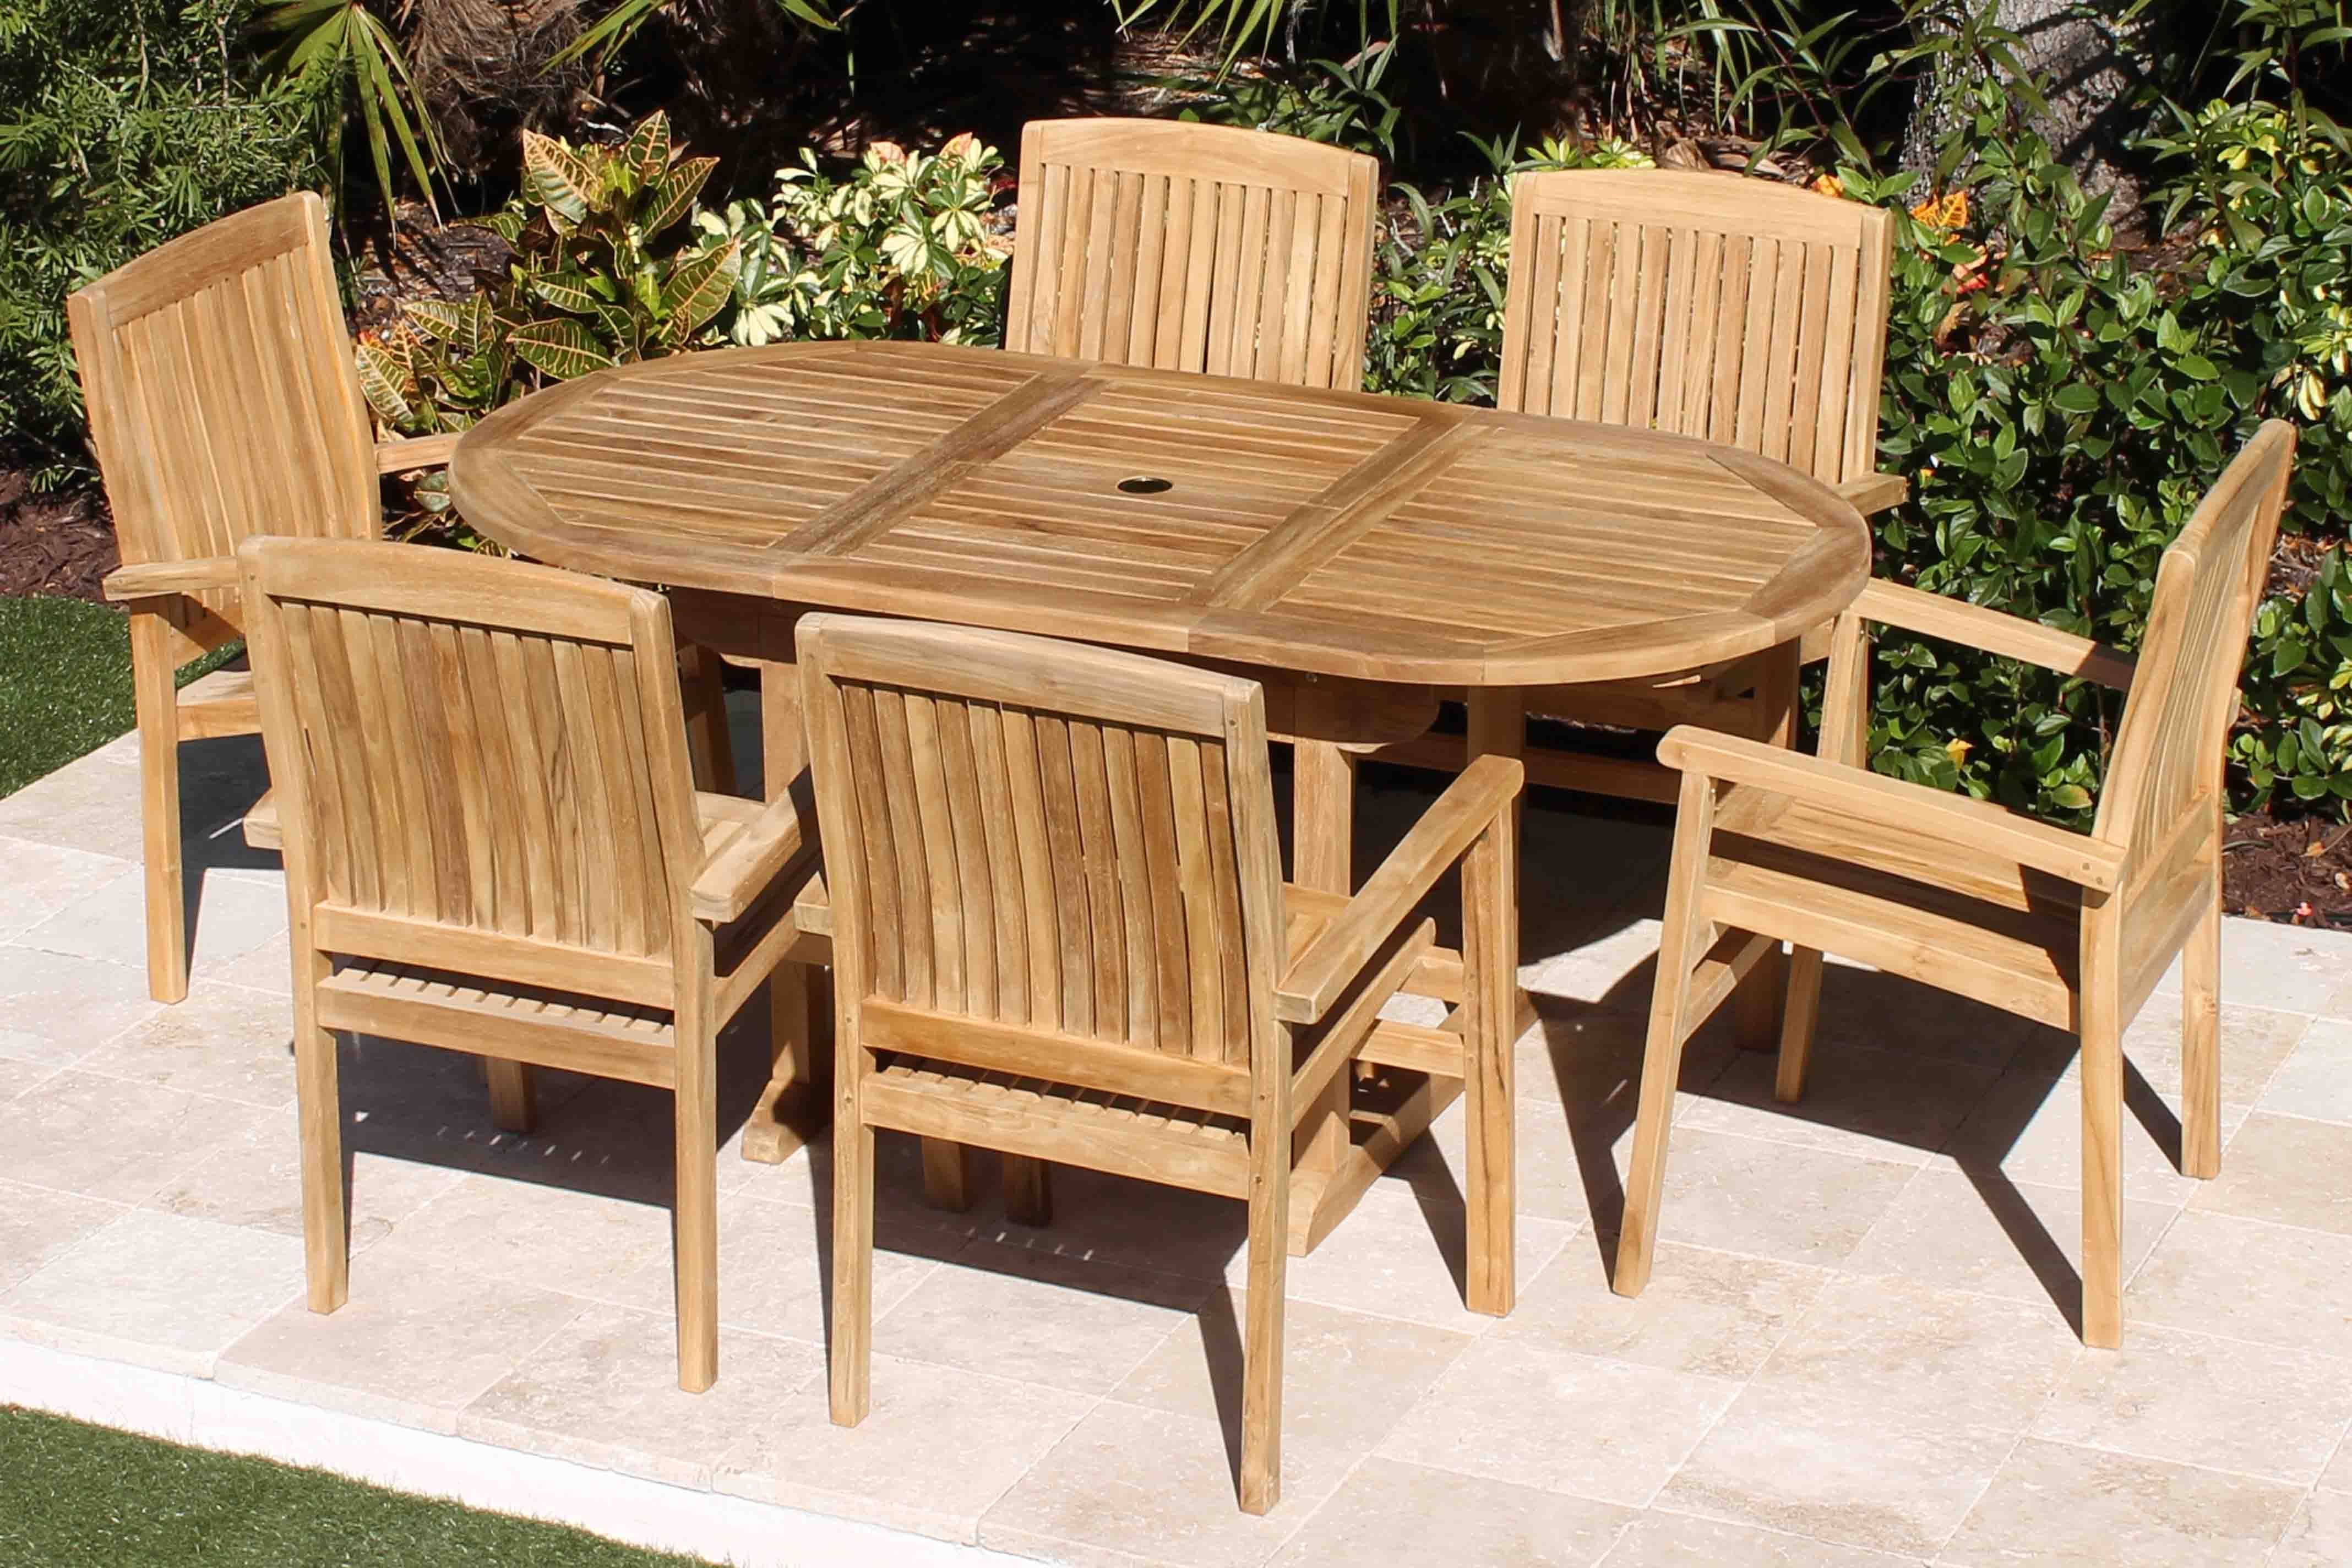 The Benefits Of Teak Furniture Over Other Woods